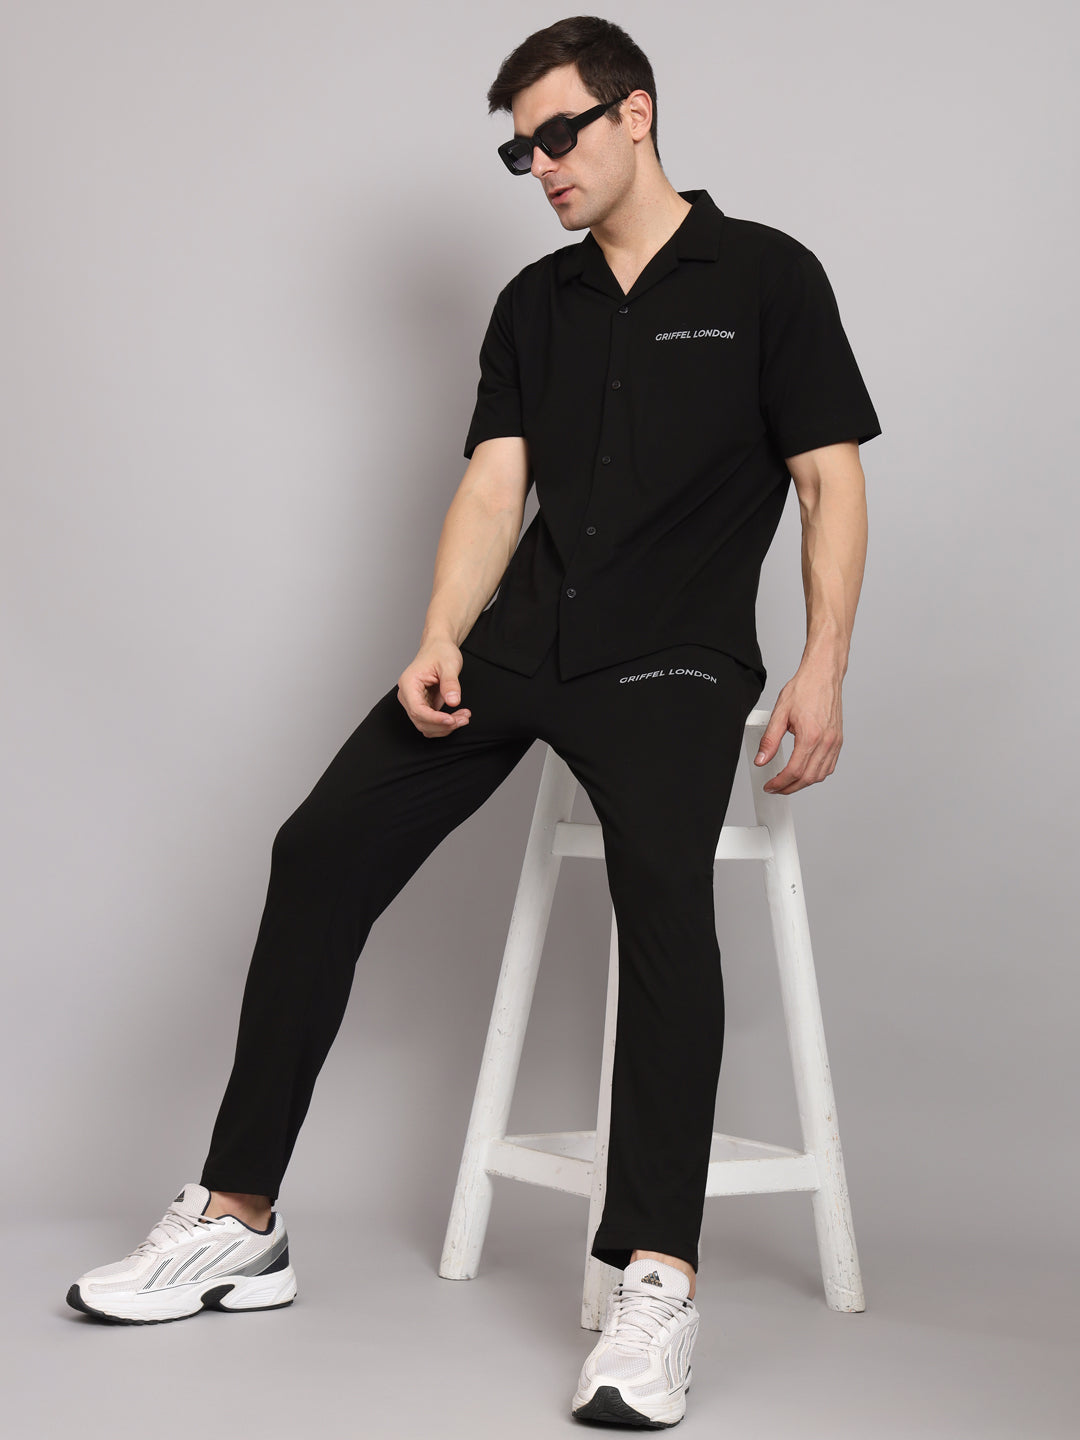 Griffel Men's Pre Winter Front Logo Solid Cotton Basic Black Bowling Shirt and Joggers Full Co-Ord Set - griffel